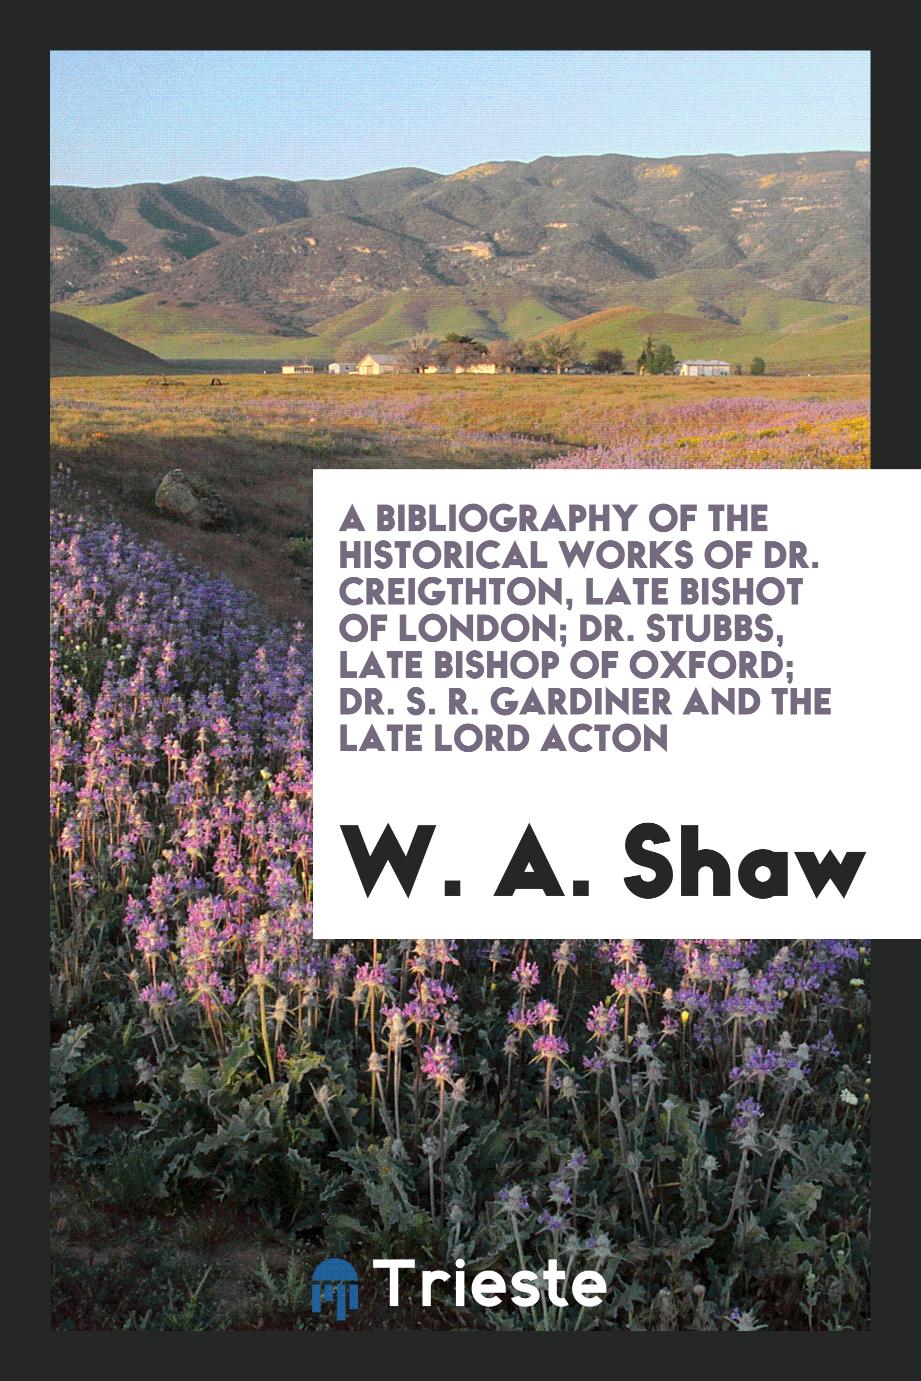 A Bibliography of the Historical Works of Dr. Creighton, Late Bishop of London; Dr. Stubbs, Late Bishop of Oxford; Dr. S. R. Gardiner and The late Lord Acton